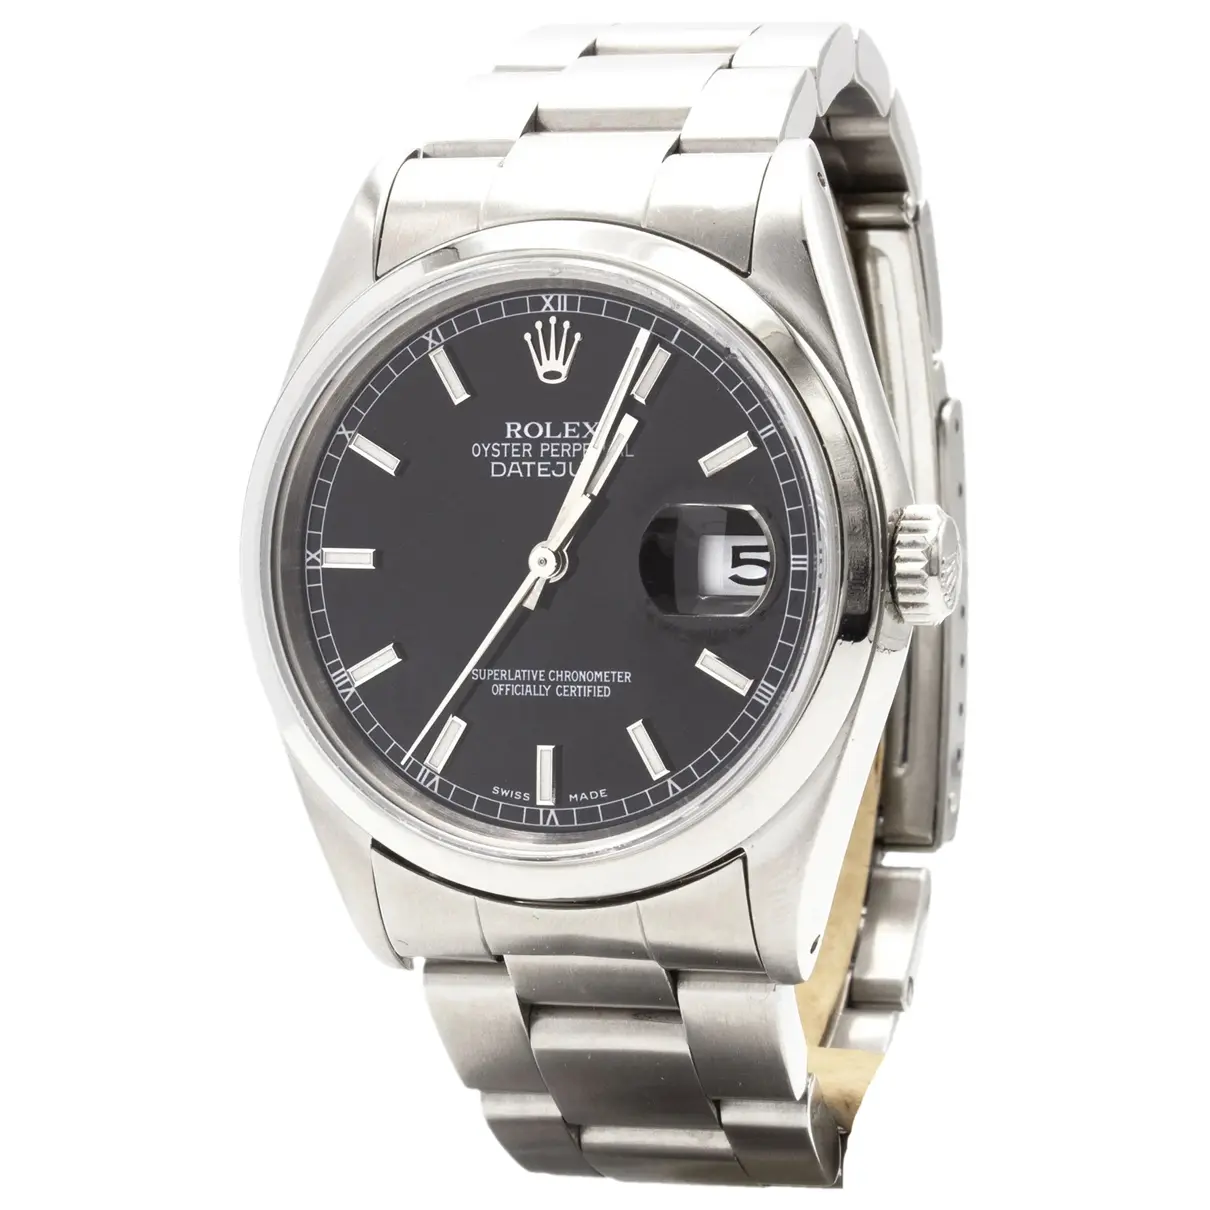 Oyster Perpetual 36mm watch